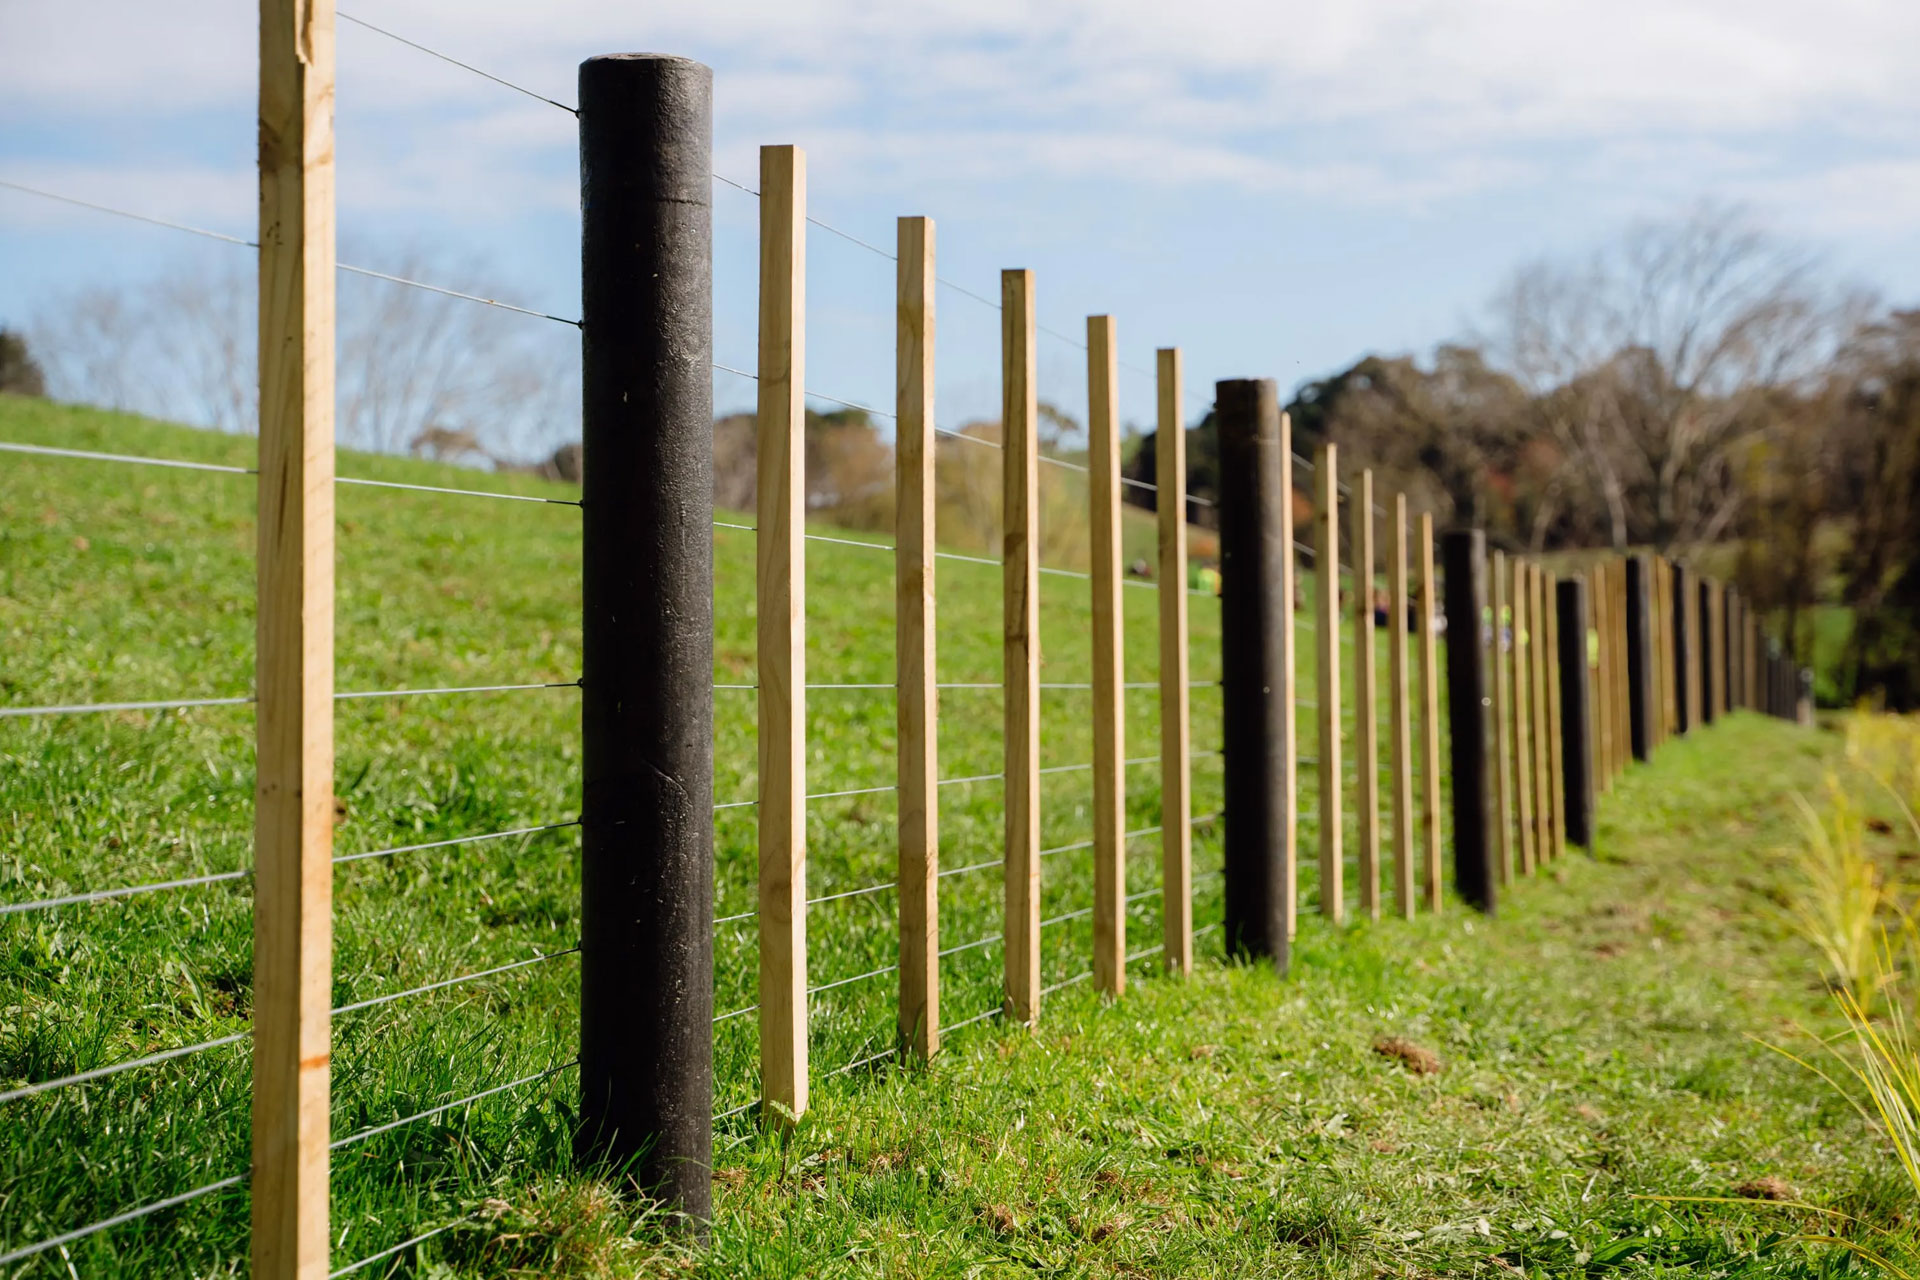 turning-banner-media-into-fence-posts